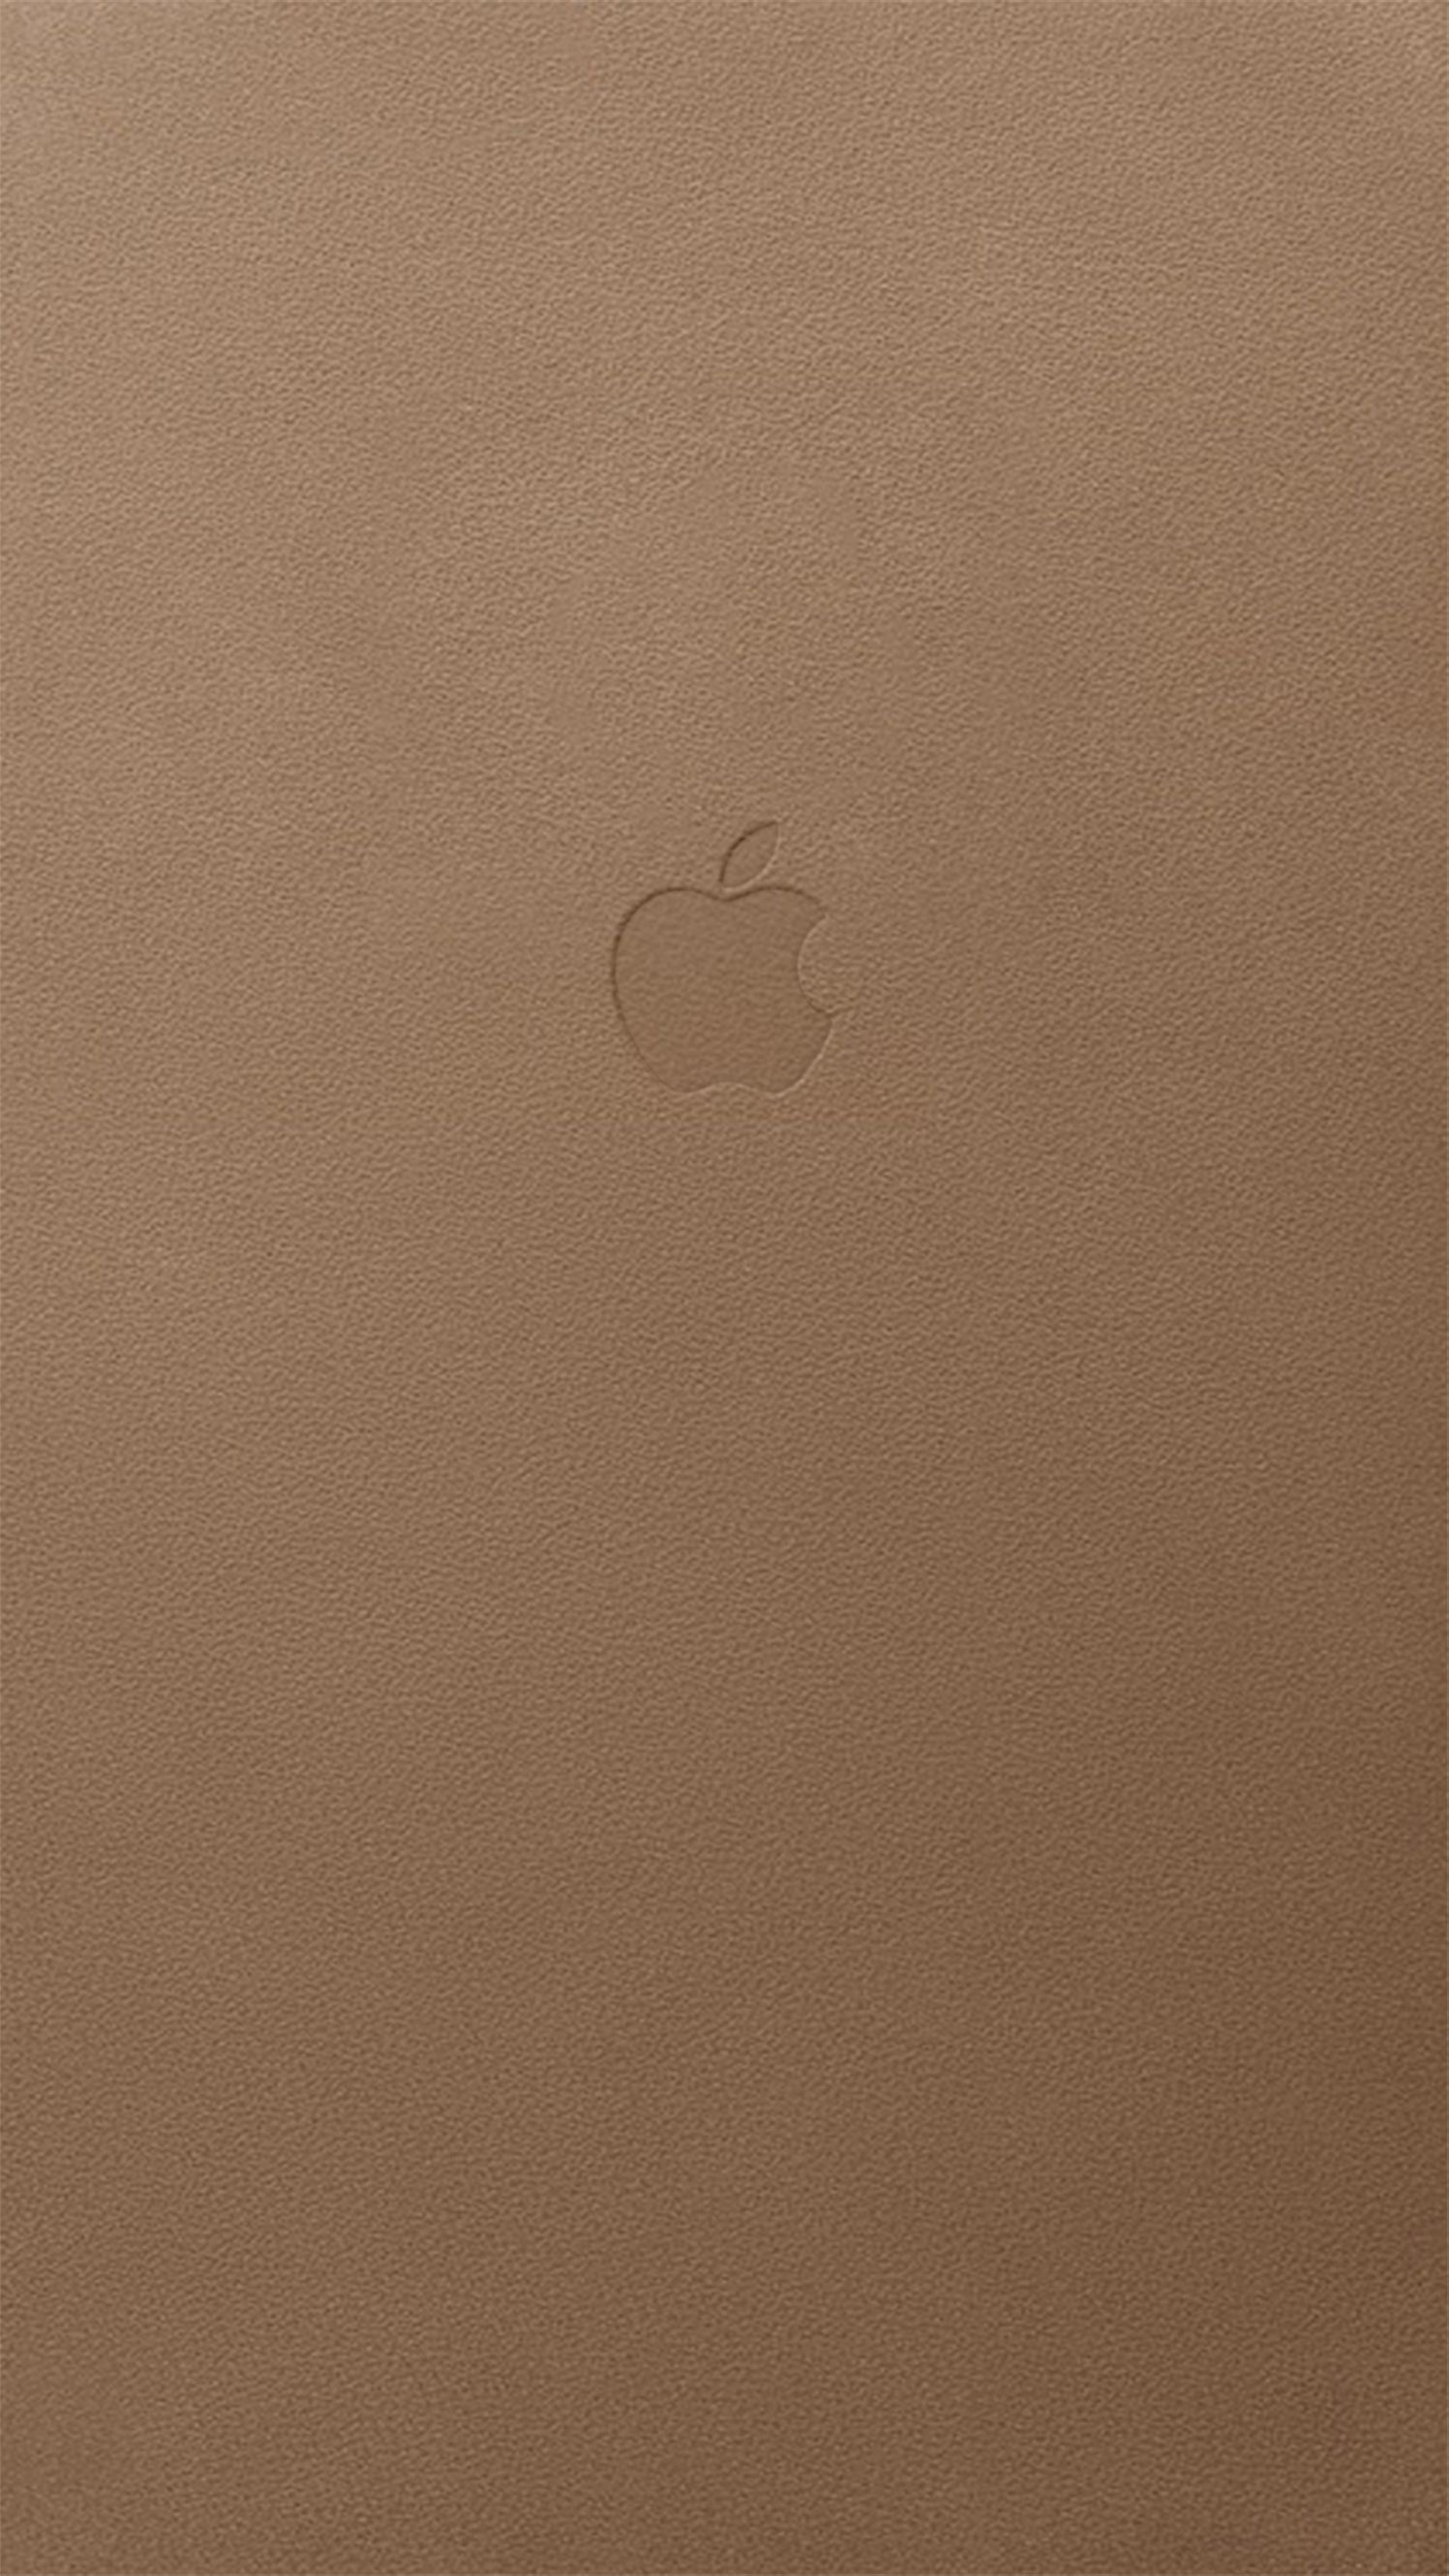 Download Get the bold and stylish Dark Brown Iphone to upgrade your tech  collection Wallpaper  Wallpaperscom